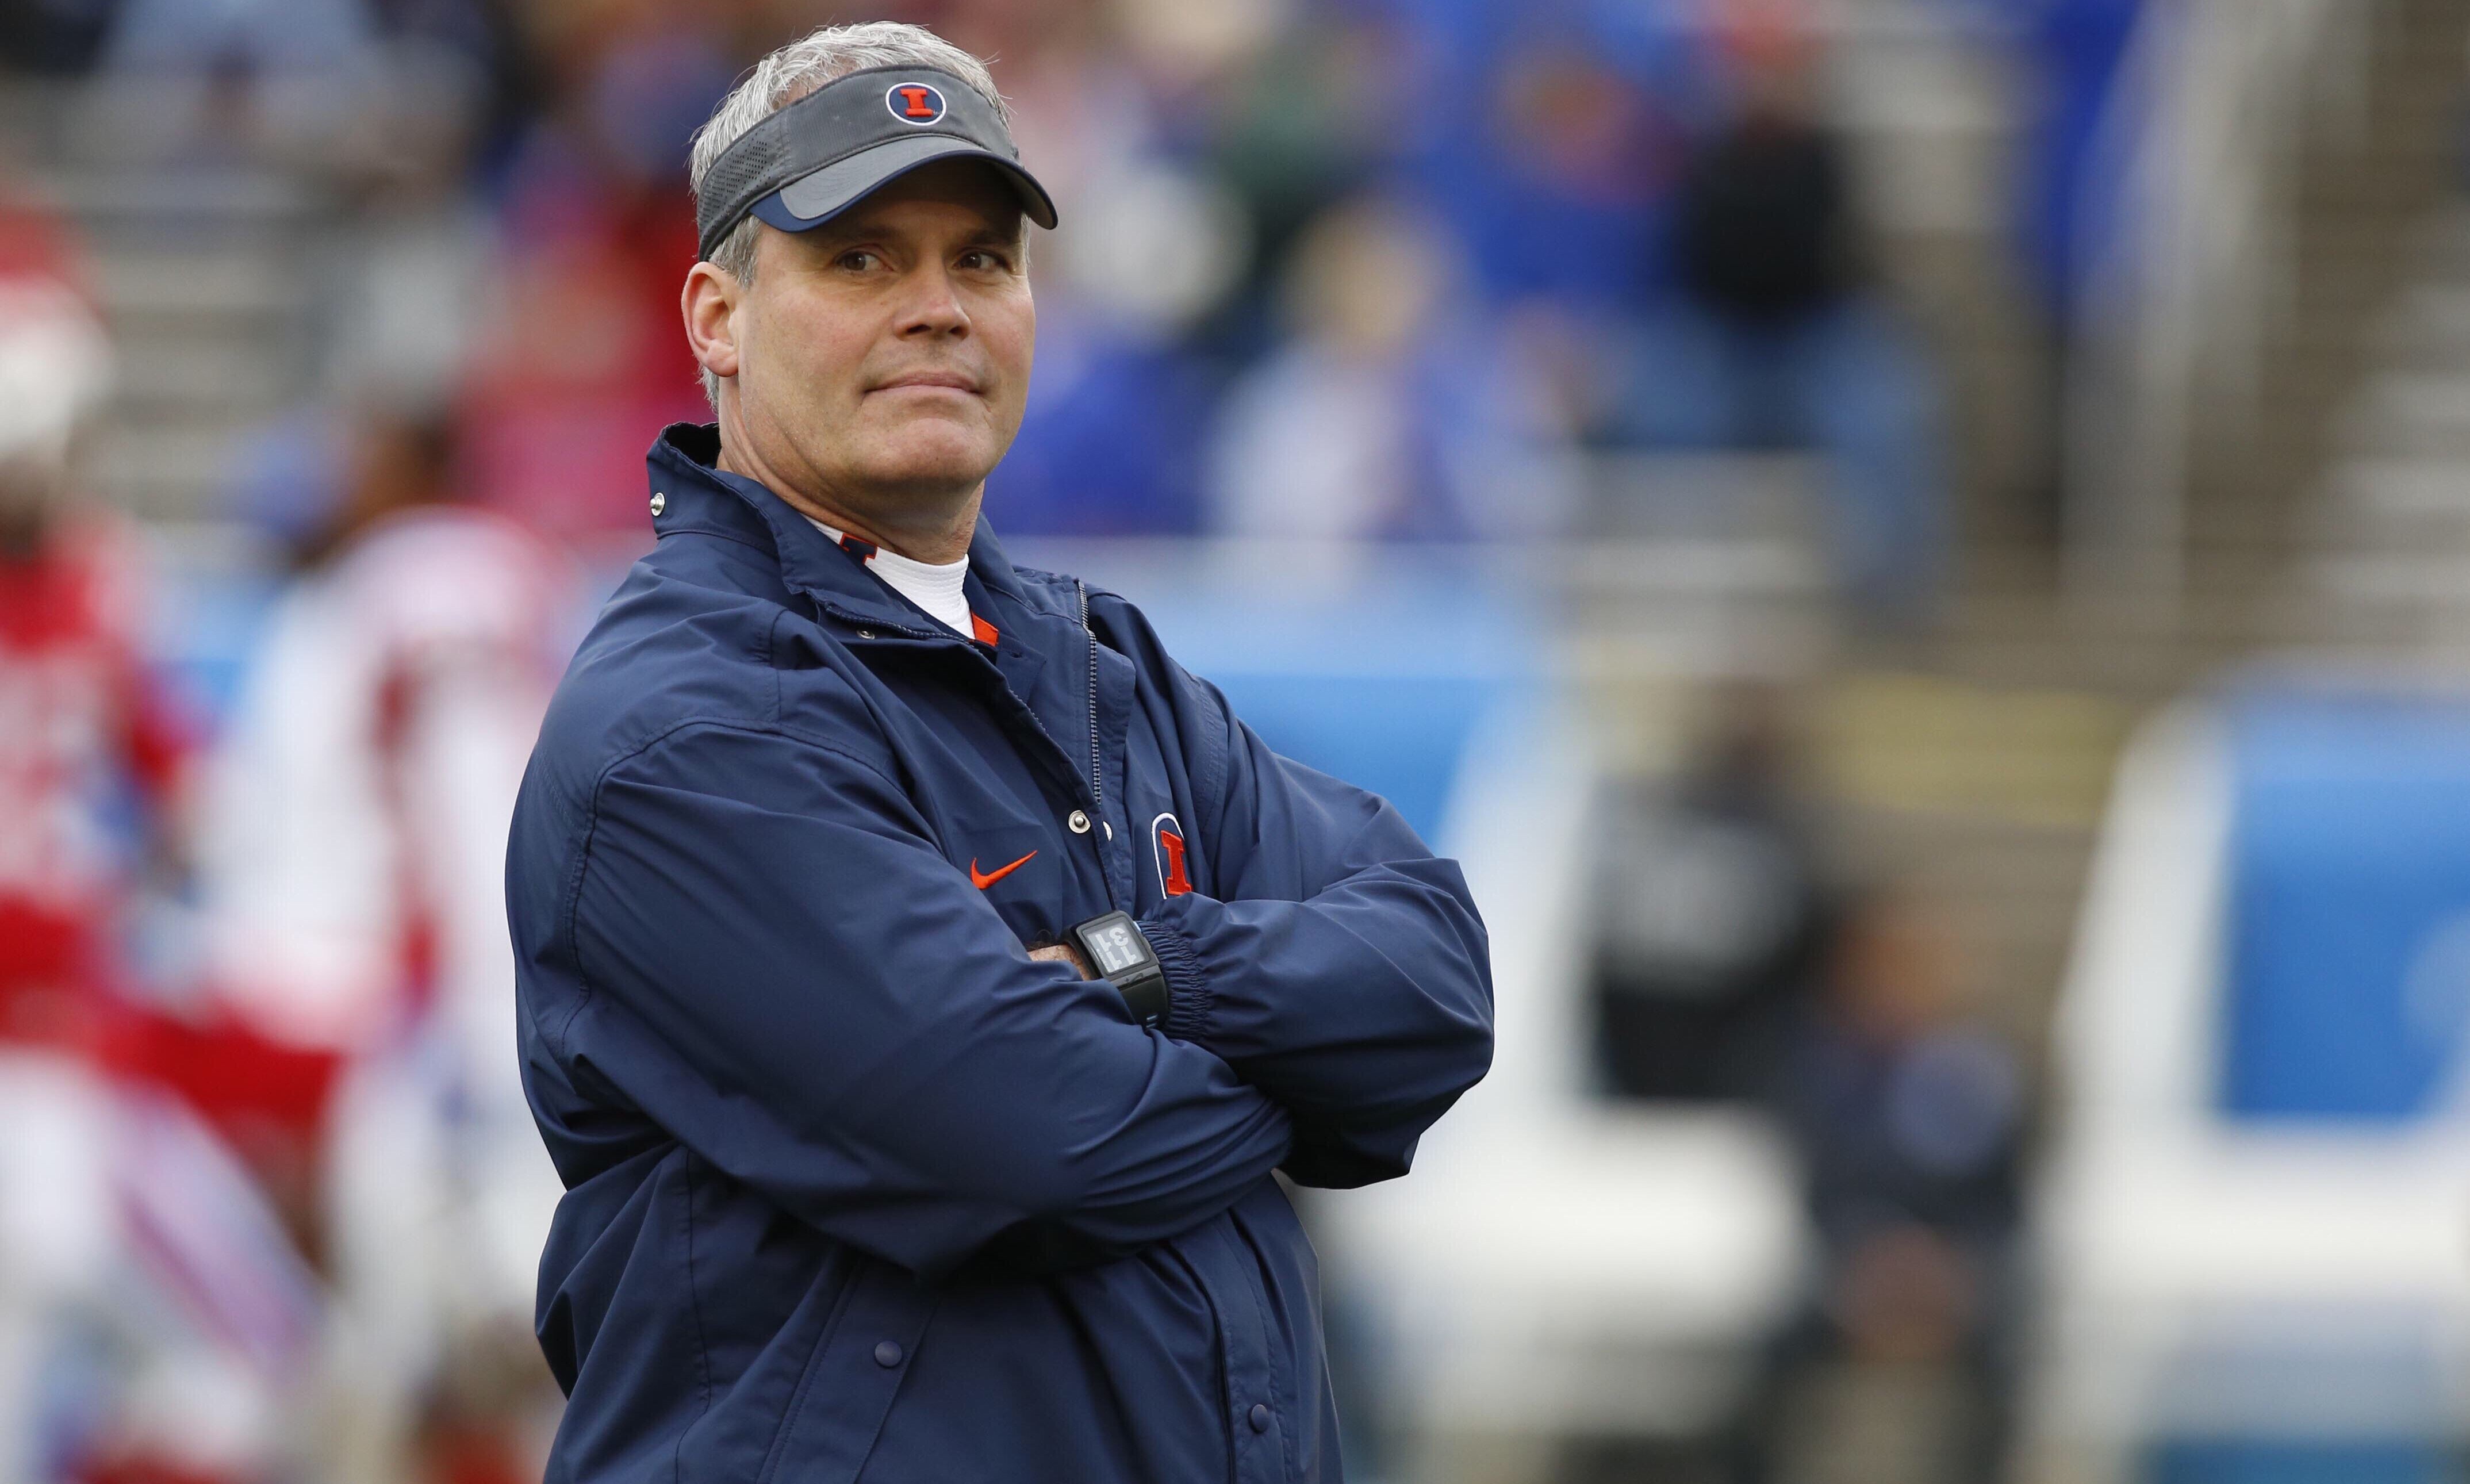 Illinois Football's Bowl Loss Proves Tim Beckman Must Go